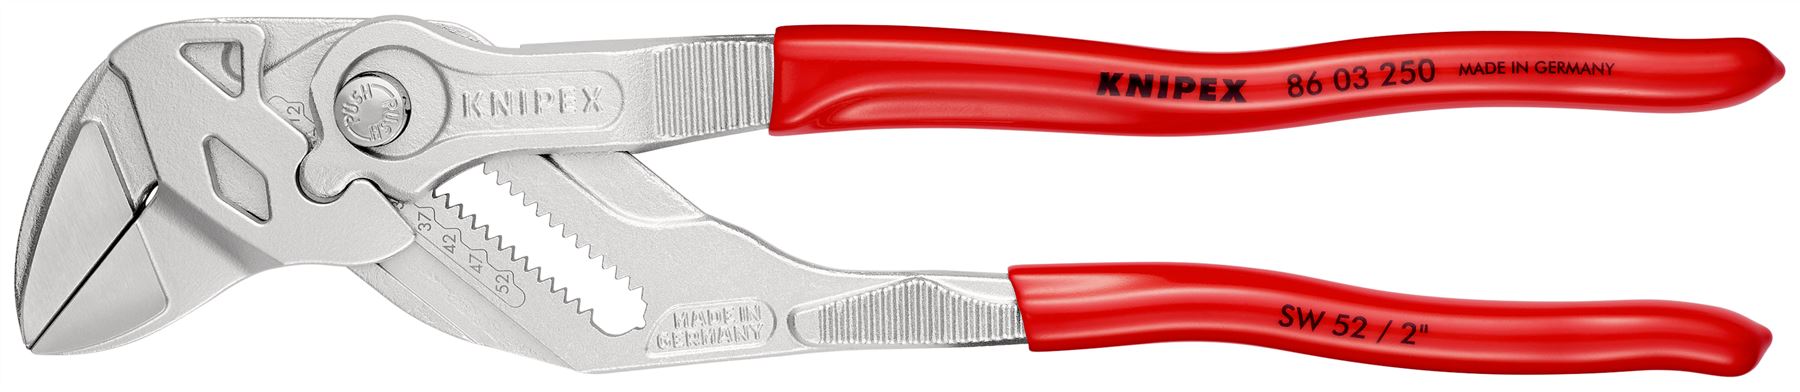 KNIPEX Pliers Wrench Adjustable Grips Push Button 100-400 mm Choose Size